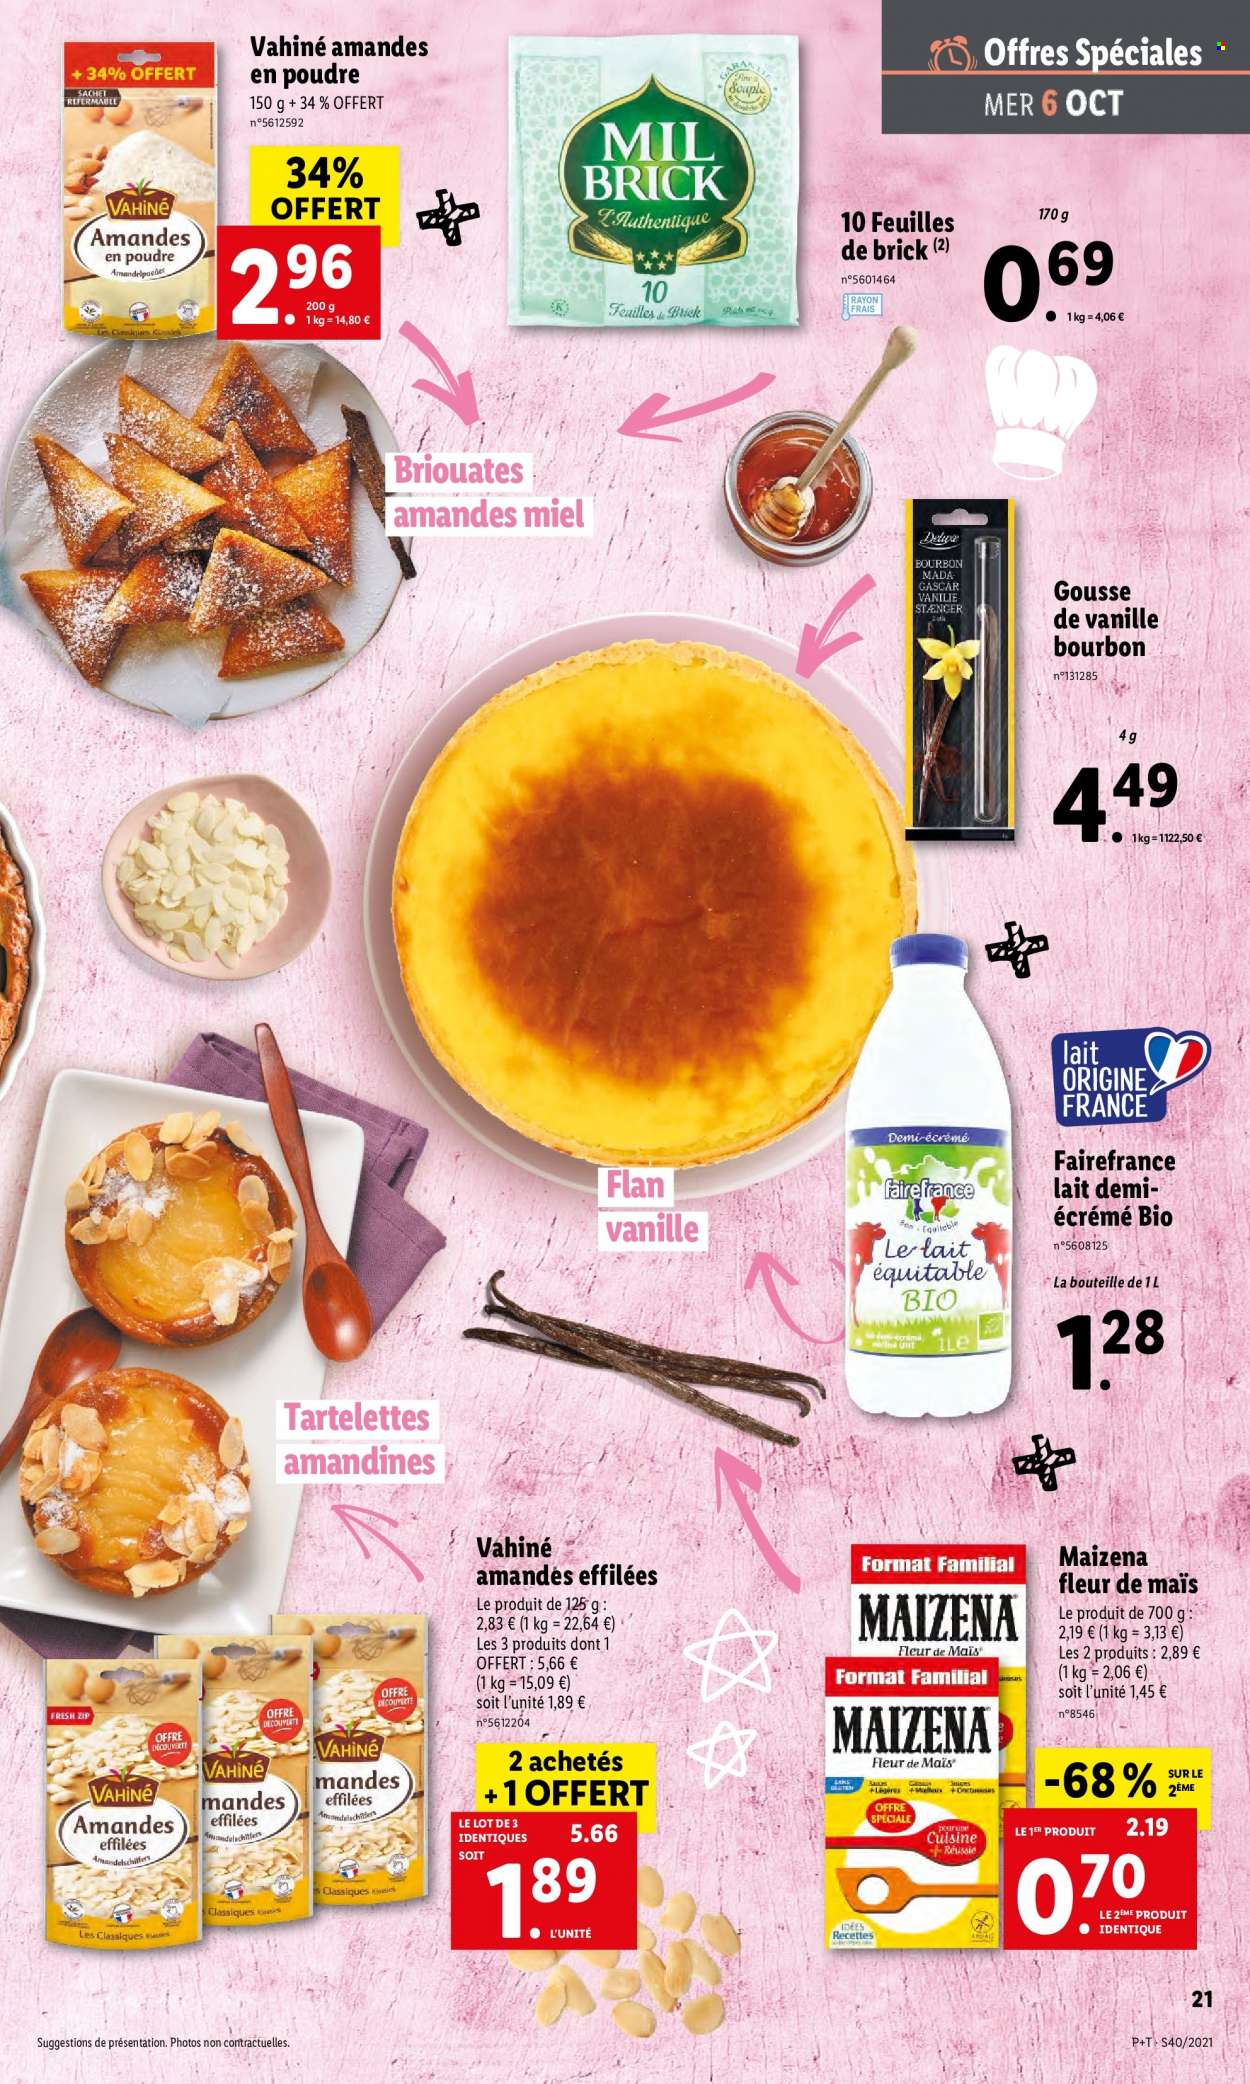 Catalogue Lidl - 06.10.2021 - 12.10.2021. Page 23.